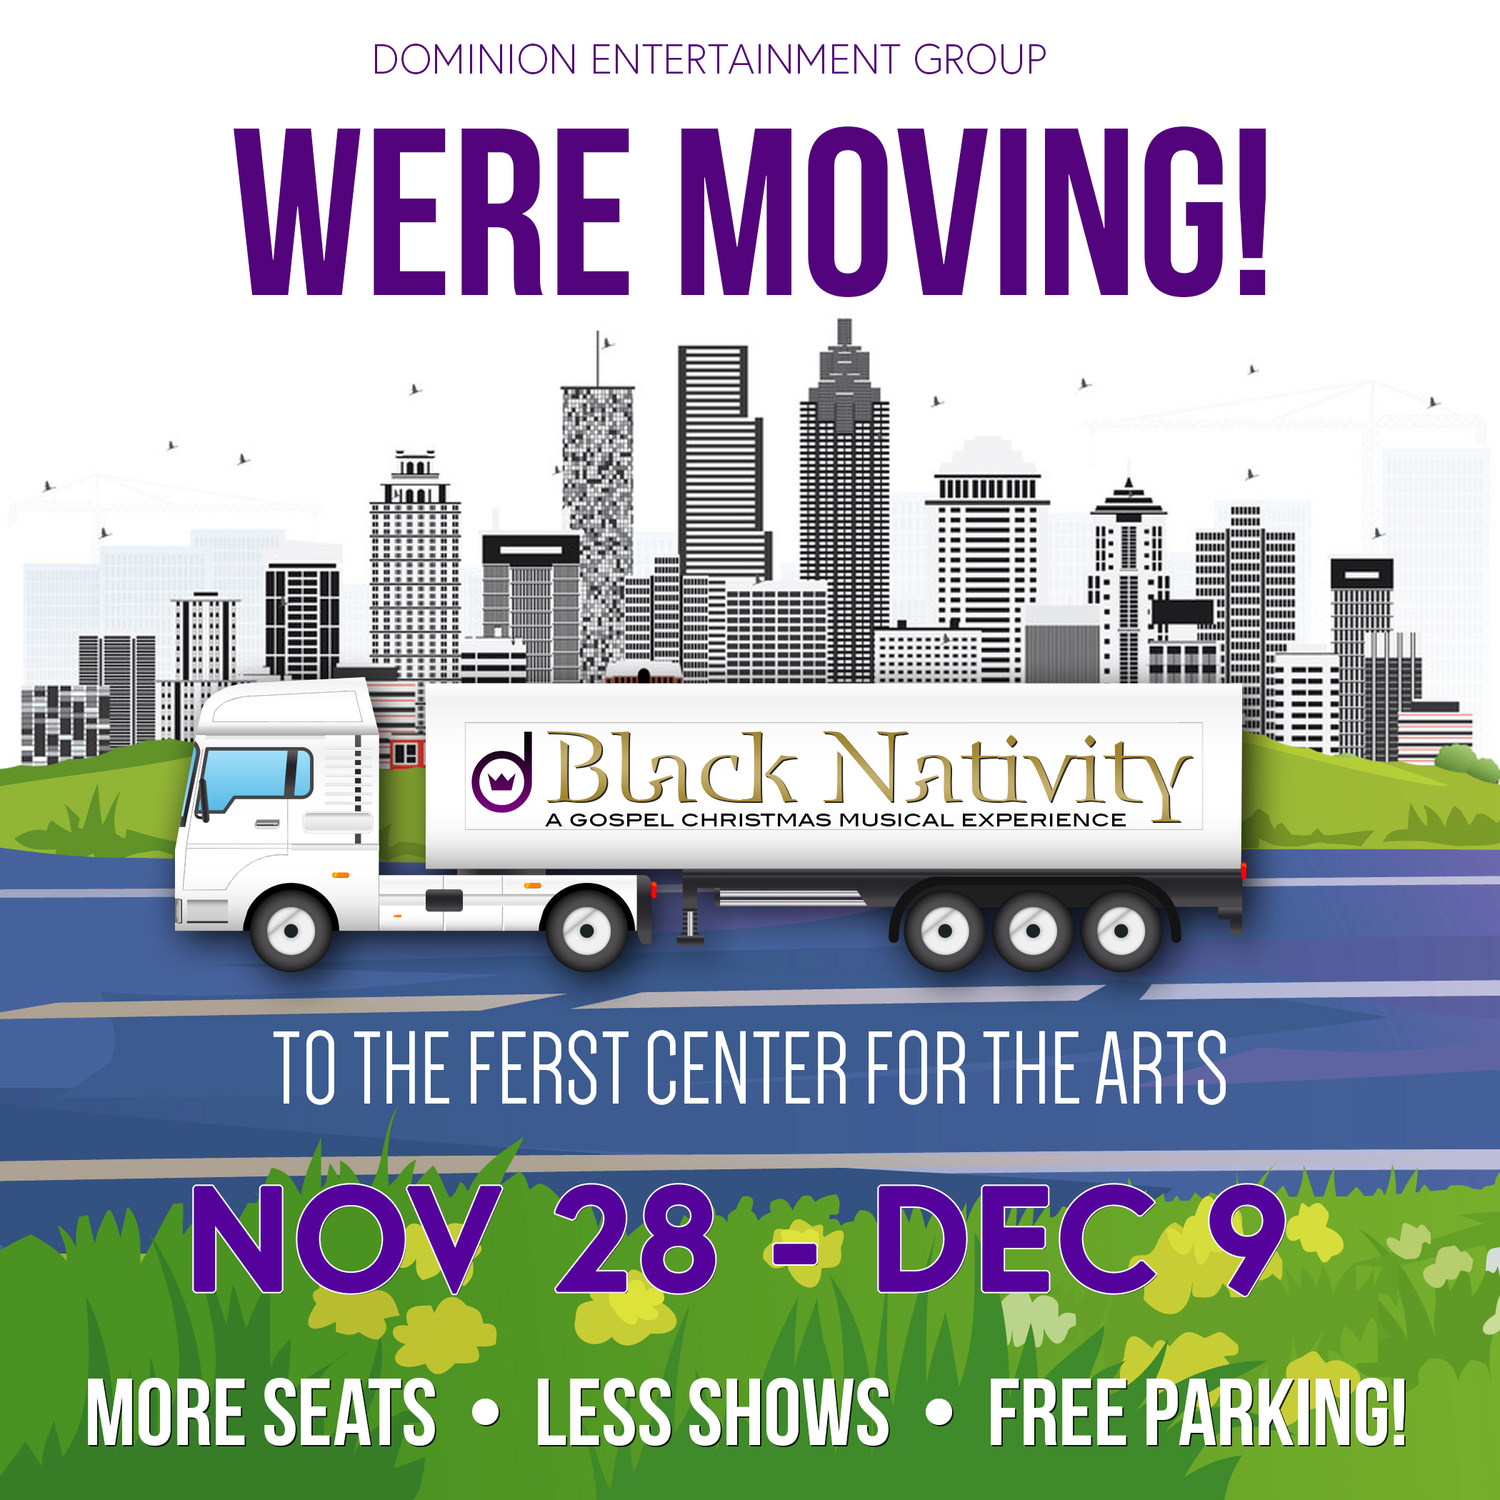 Catch Black Nativity this year in the newly renovated Ferst Center for the Arts!